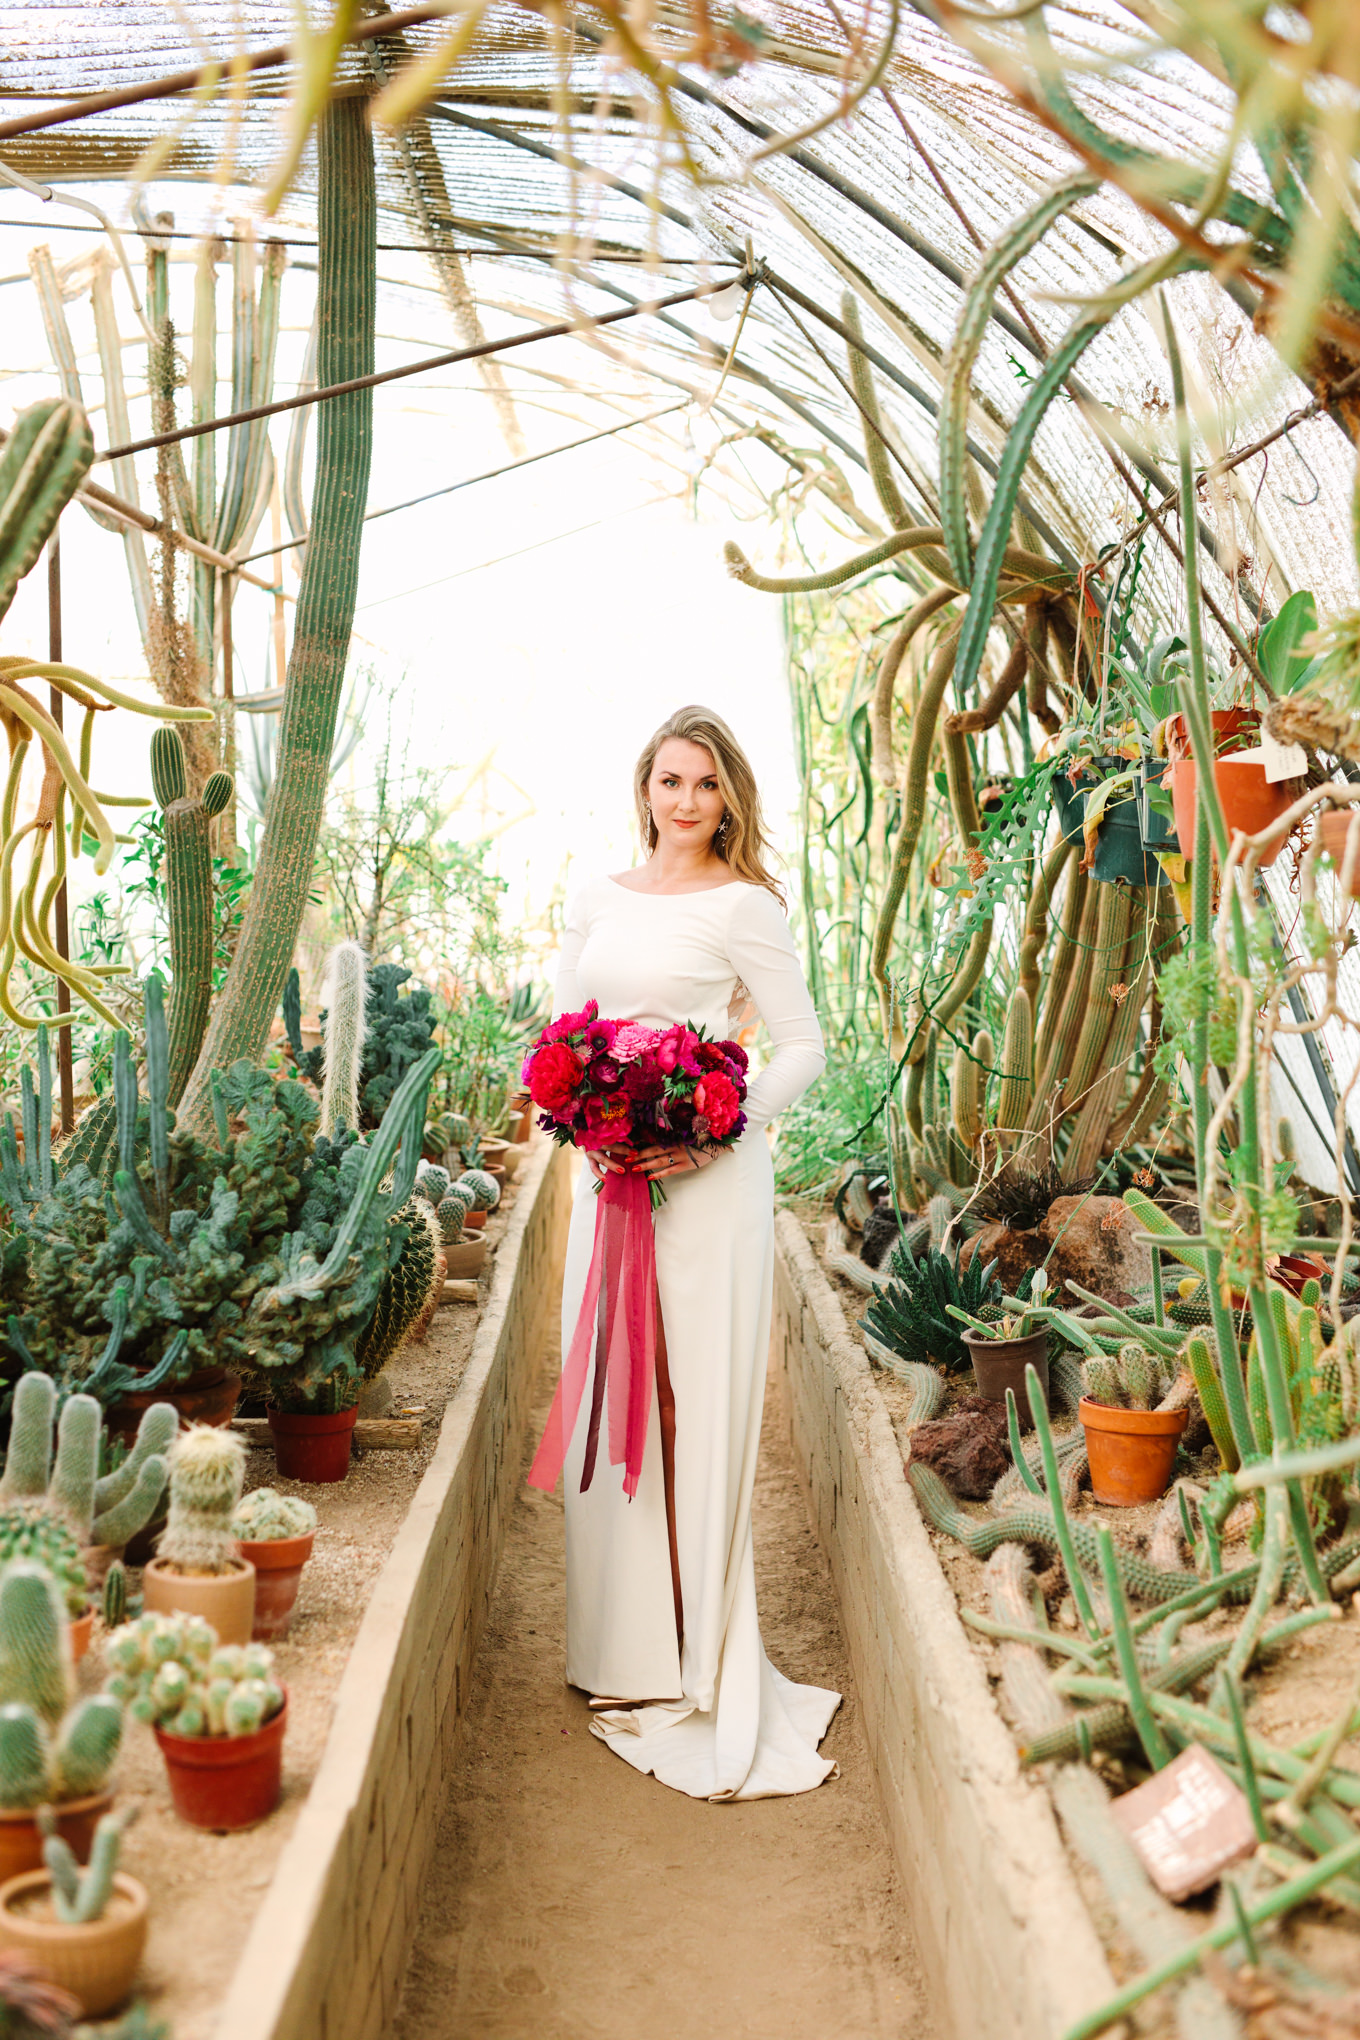 Bridal portrait in Moorten Botanical Garden greenhouse | Colorful jewel tone Palm Springs elopement | Fresh and colorful photography for fun-loving couples in Southern California | #colorfulelopement #palmspringselopement #elopementphotography #palmspringswedding Source: Mary Costa Photography | Los Angeles